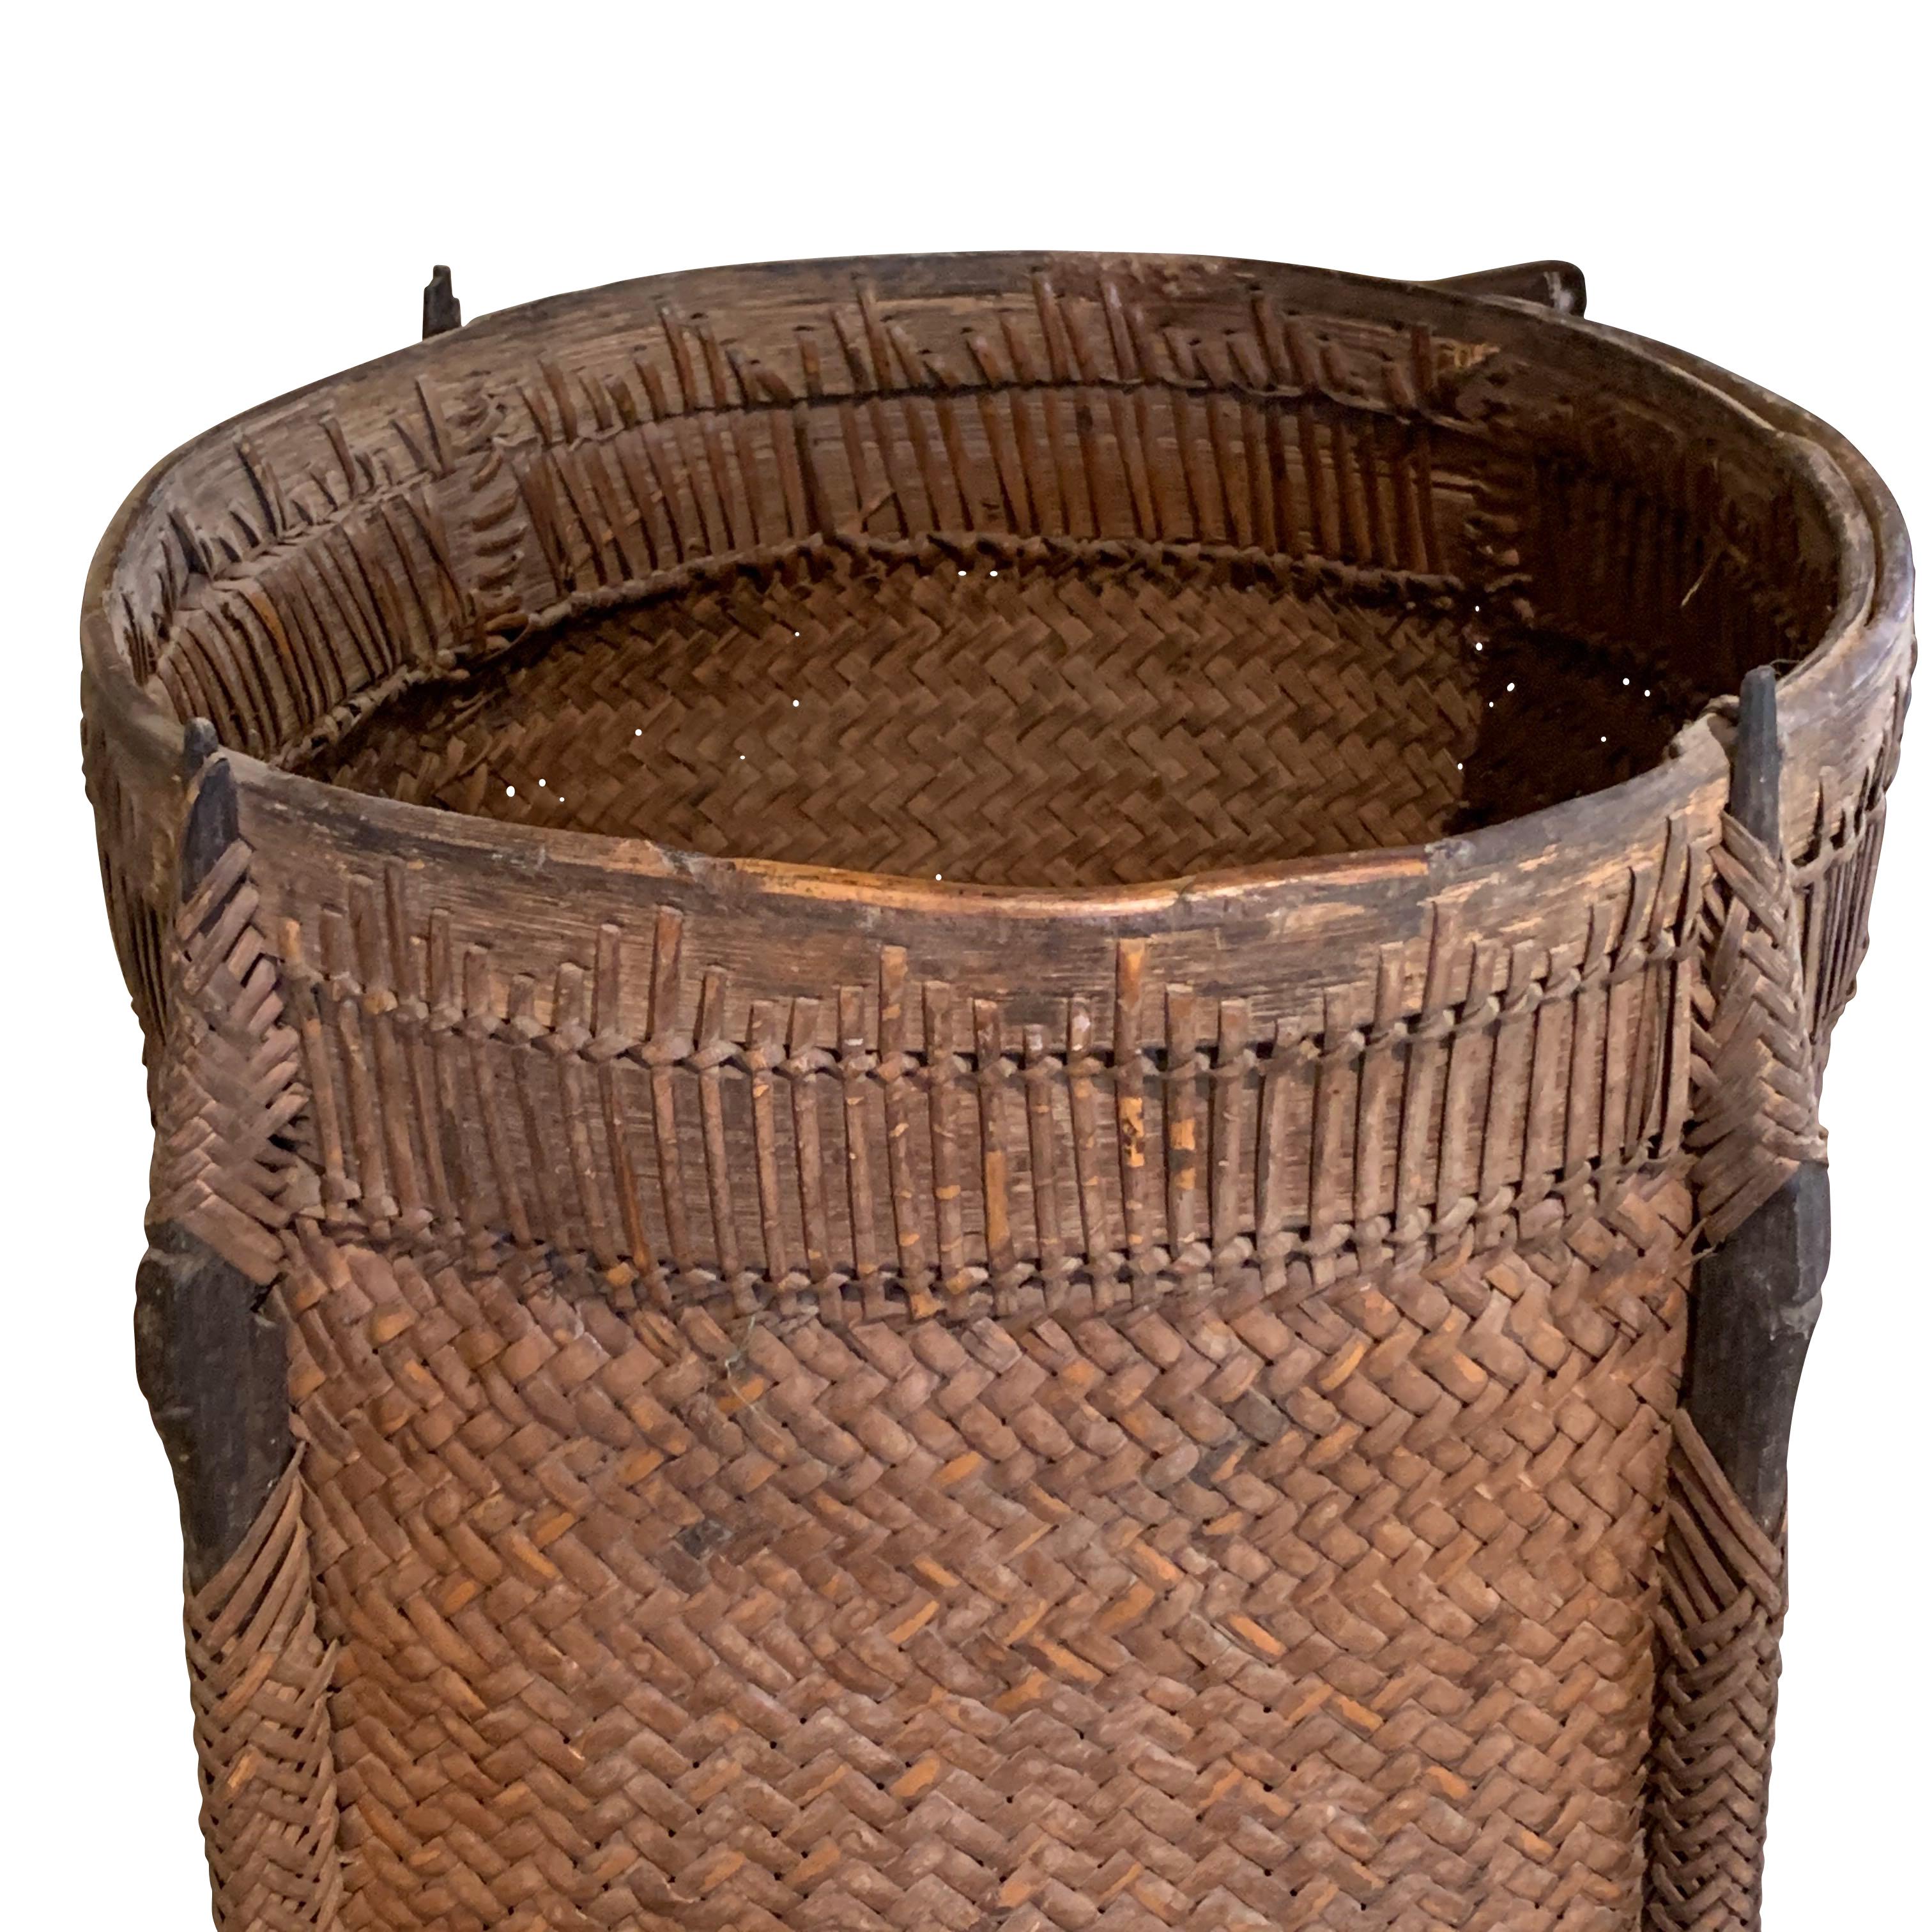 1920s Borneo handwoven basket used to store picked tea leaves
Decorative woven pattern
Square shape with a rounded bottom
Sturdy and functional.
  